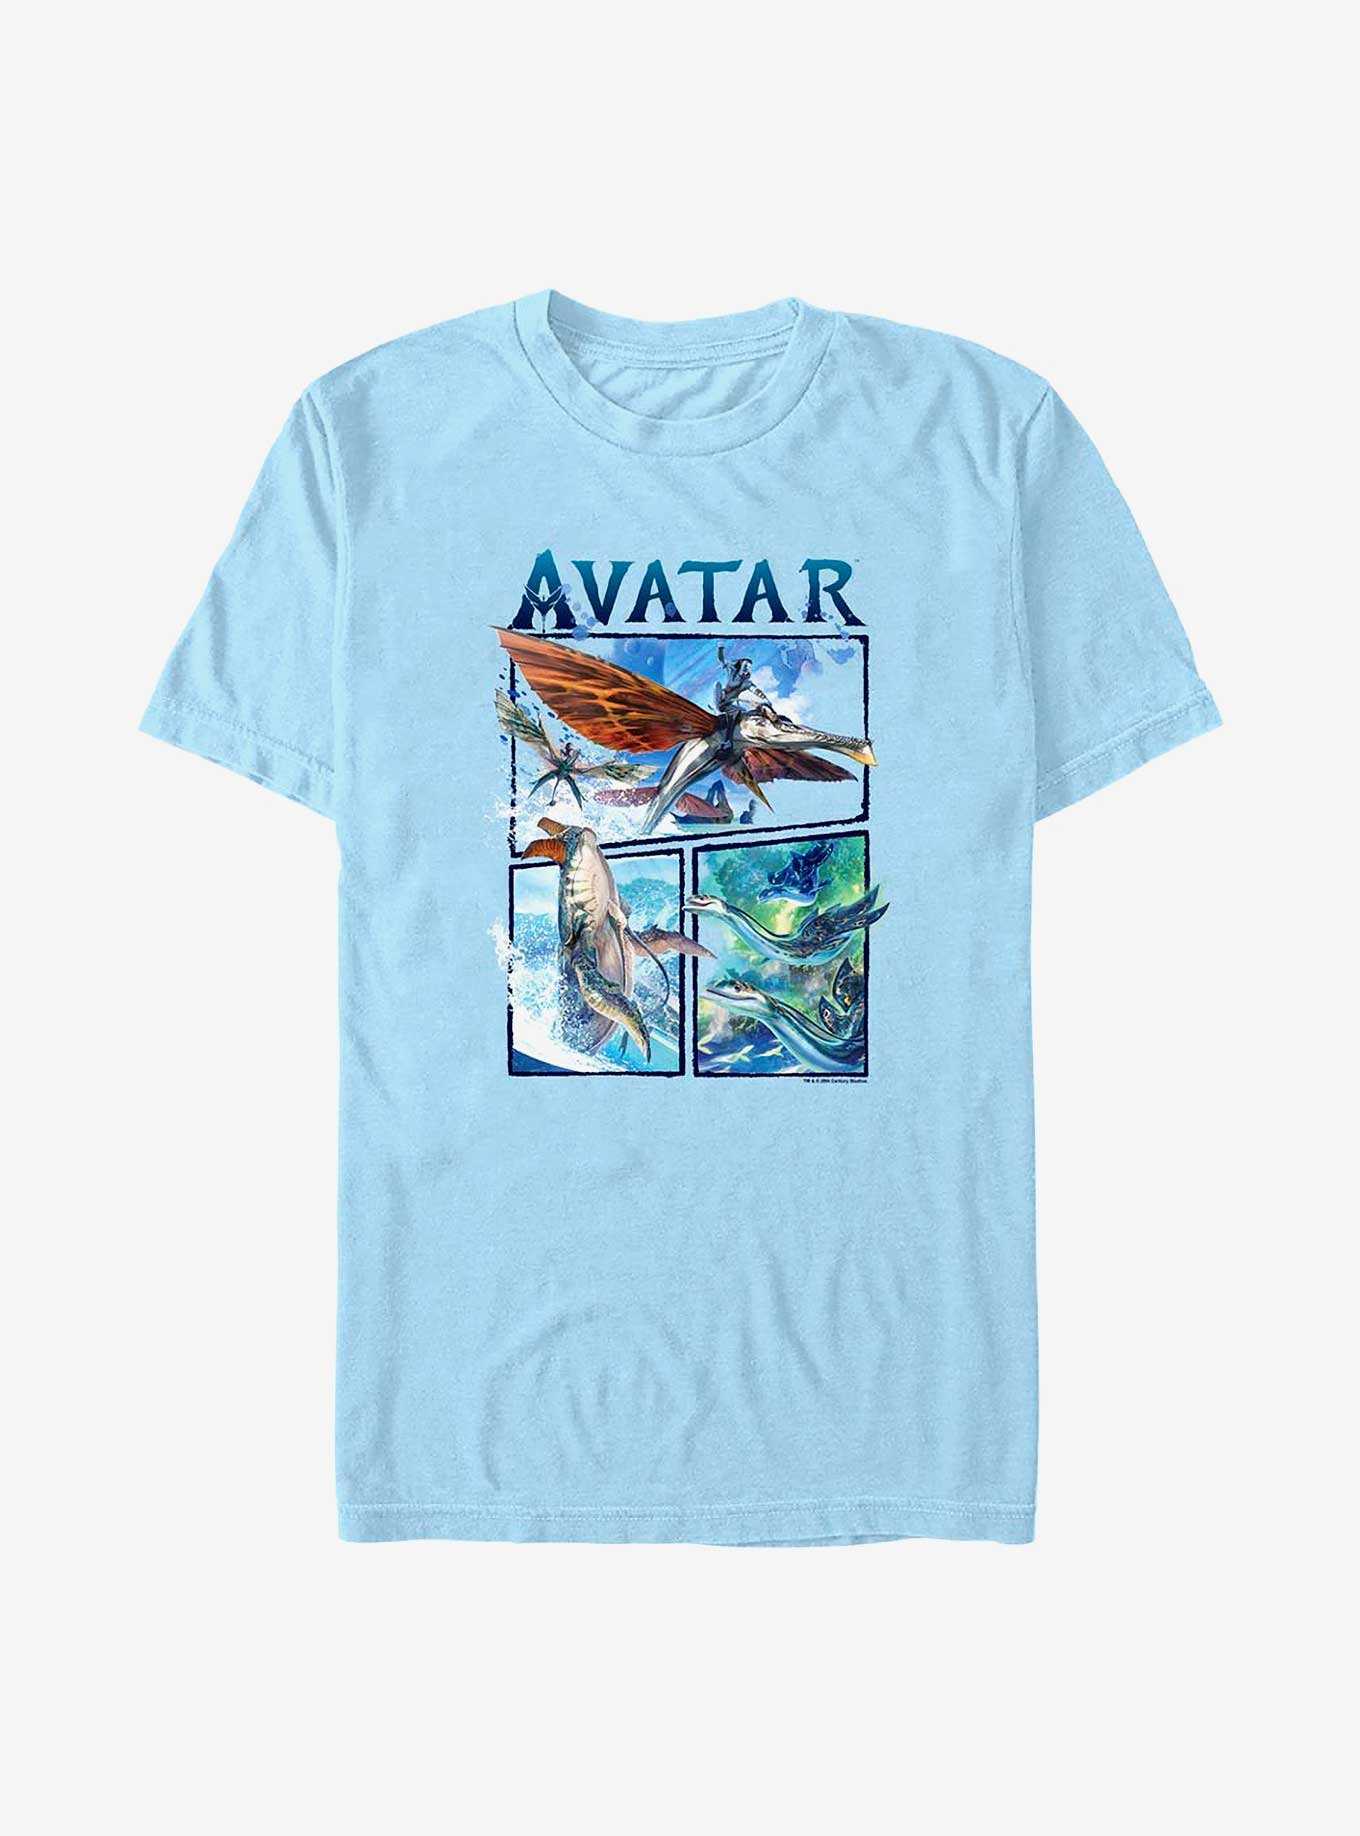 Avatar: The Way of Water Air and Sea Extra Soft T-Shirt, , hi-res